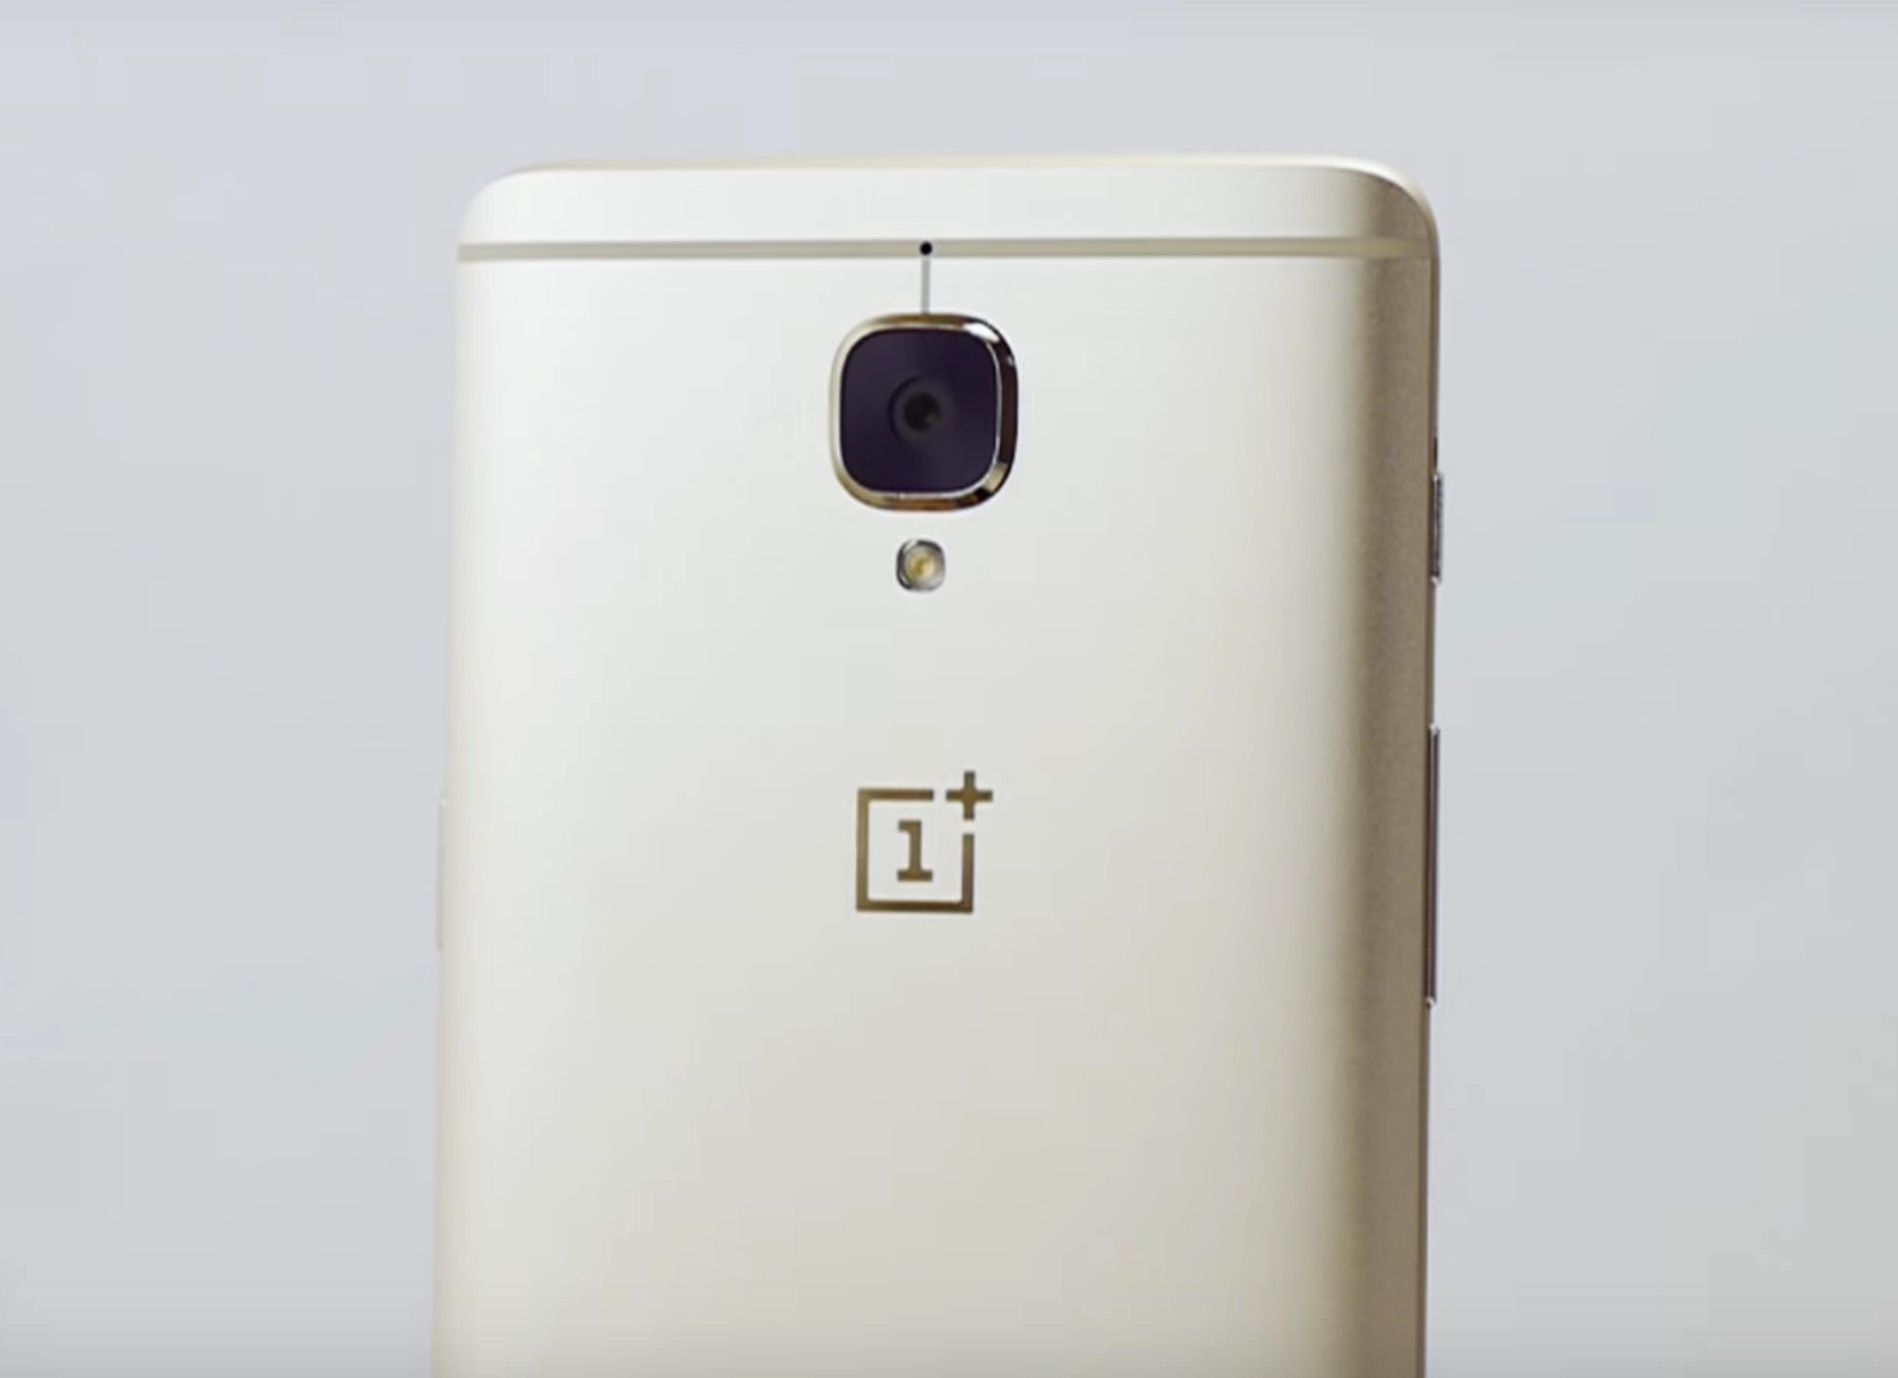 you can buy the oneplus 3 in gold on 1 august in uk 26 july in us image 1